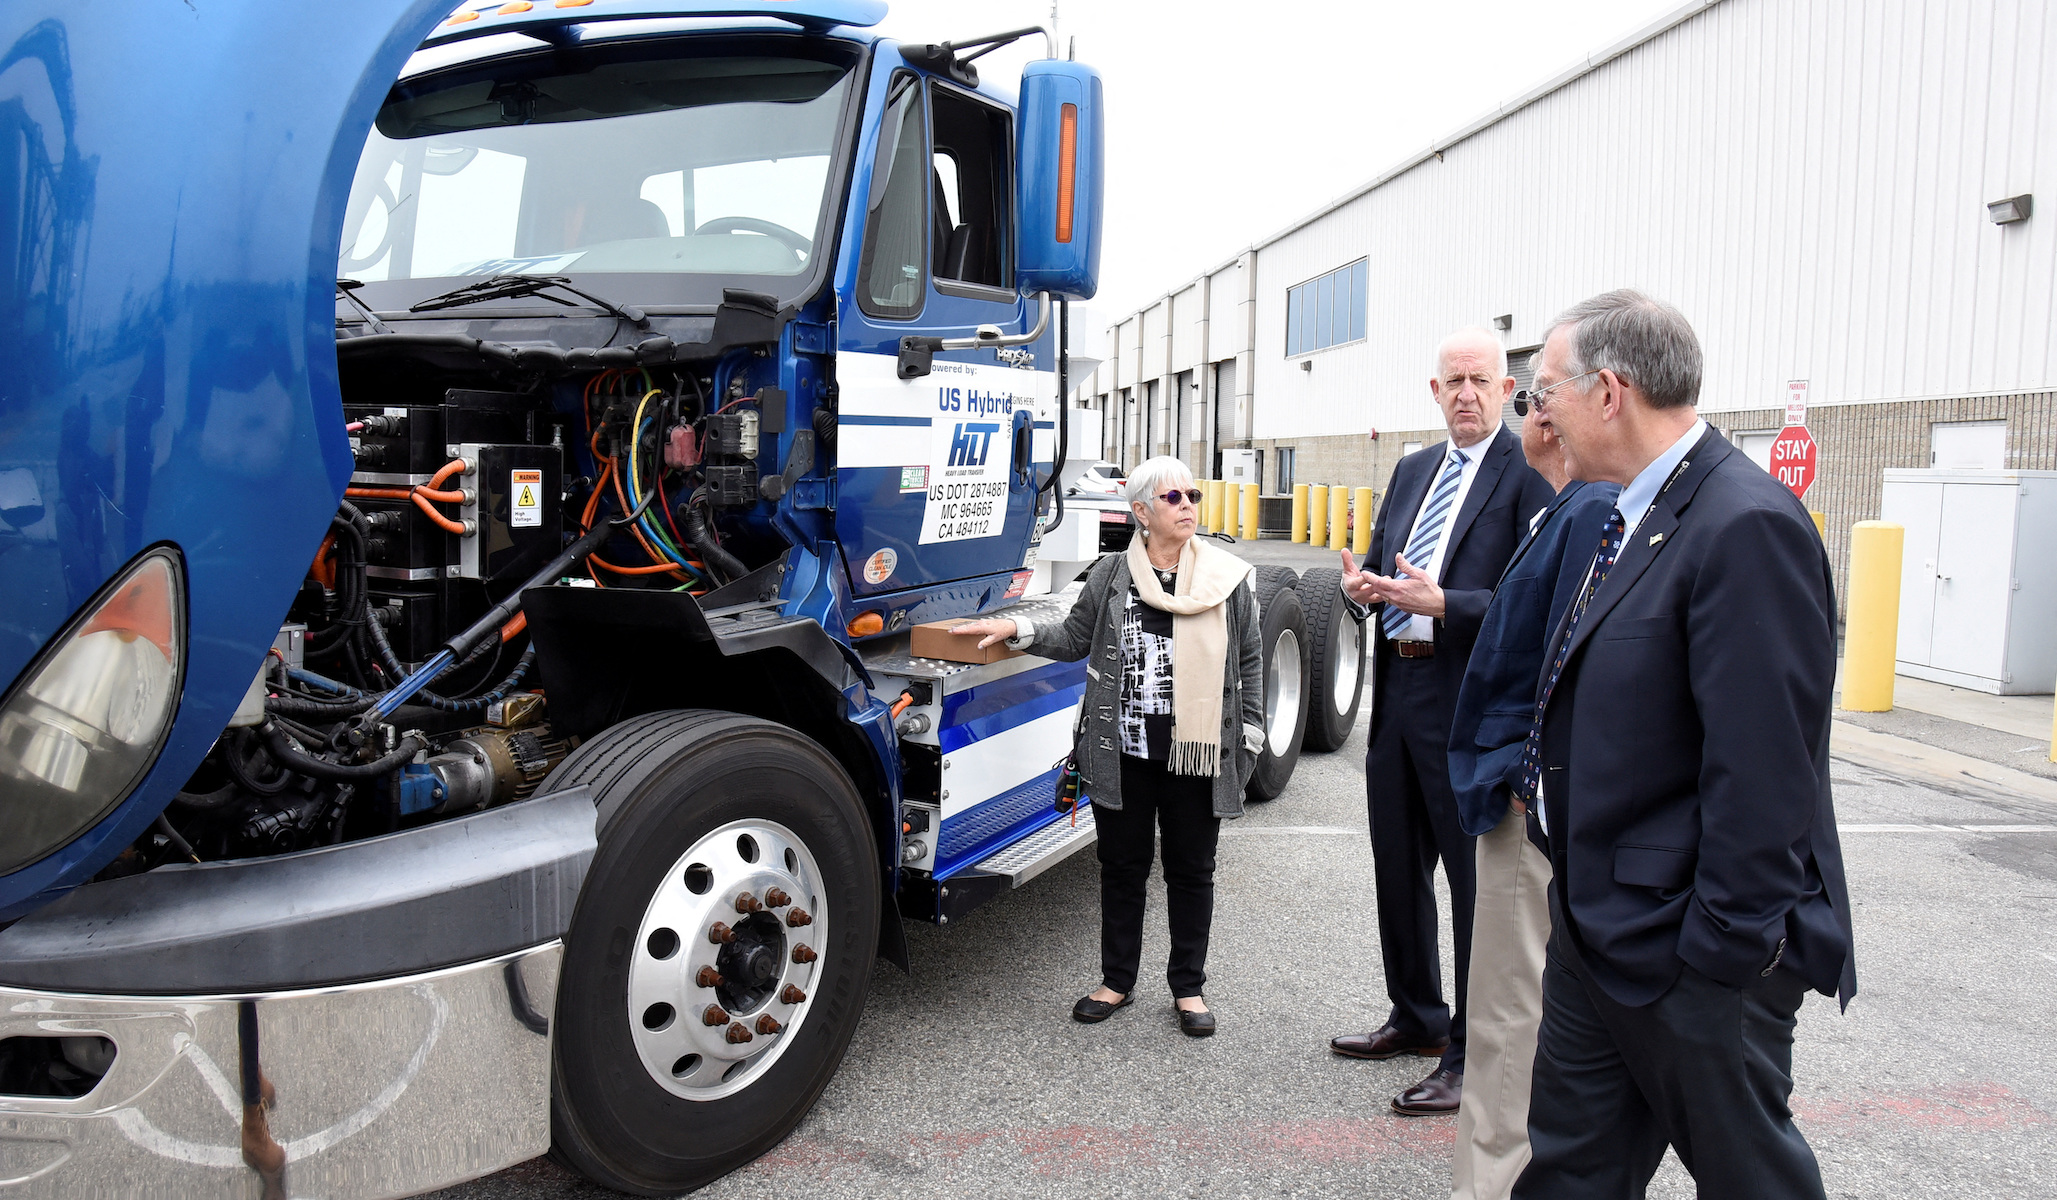 NextImg:California Approves Regulation to Phase Out Diesel Trucks by 2036 